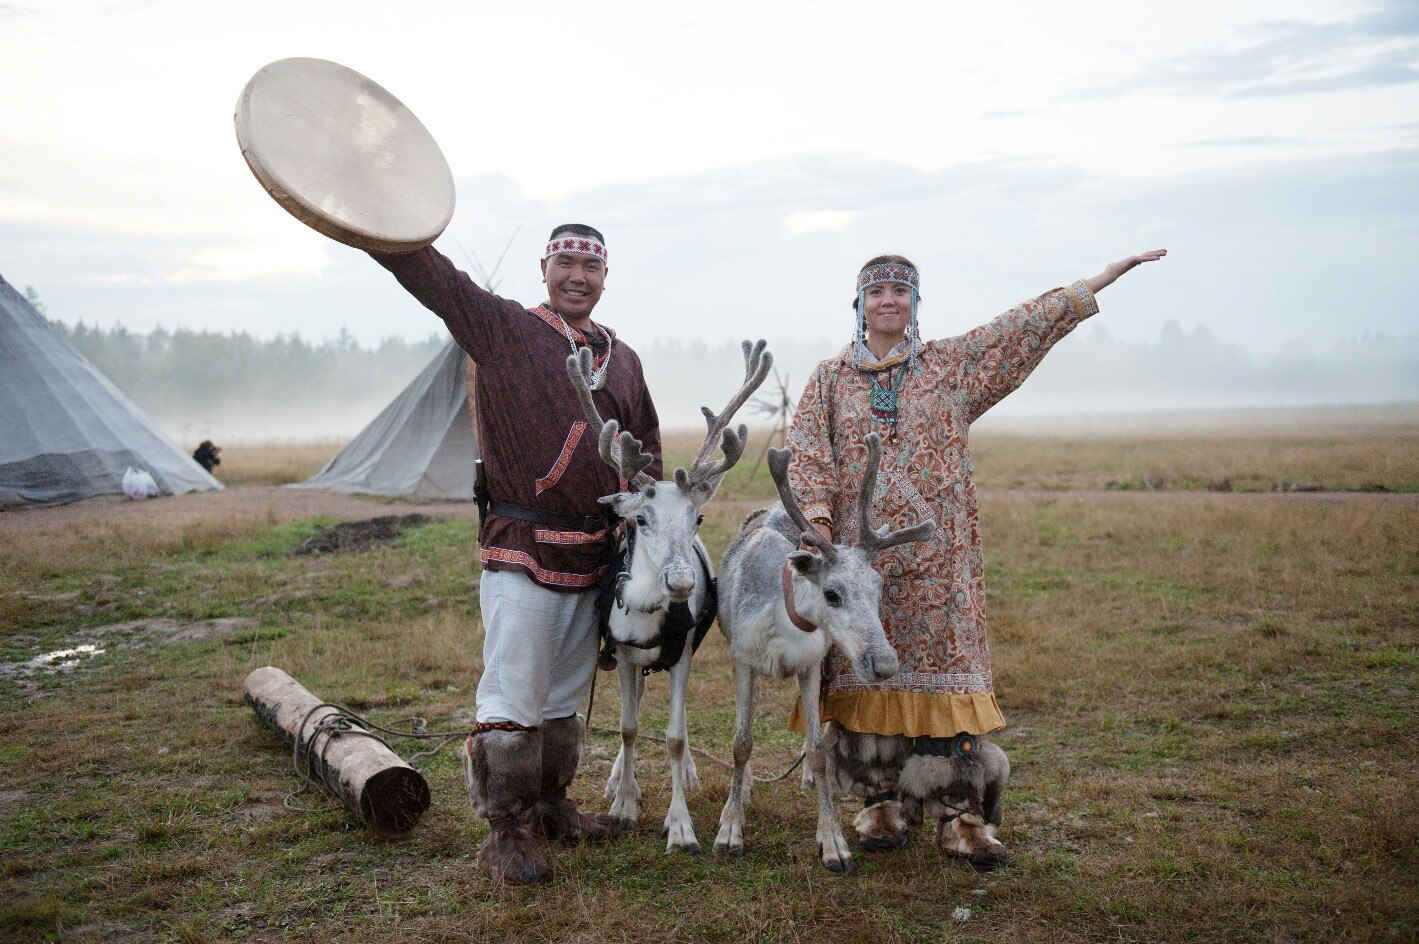 The Chukchis appeared in the tundra before the Christian era and called themselves the “Luoraveti” or real people.